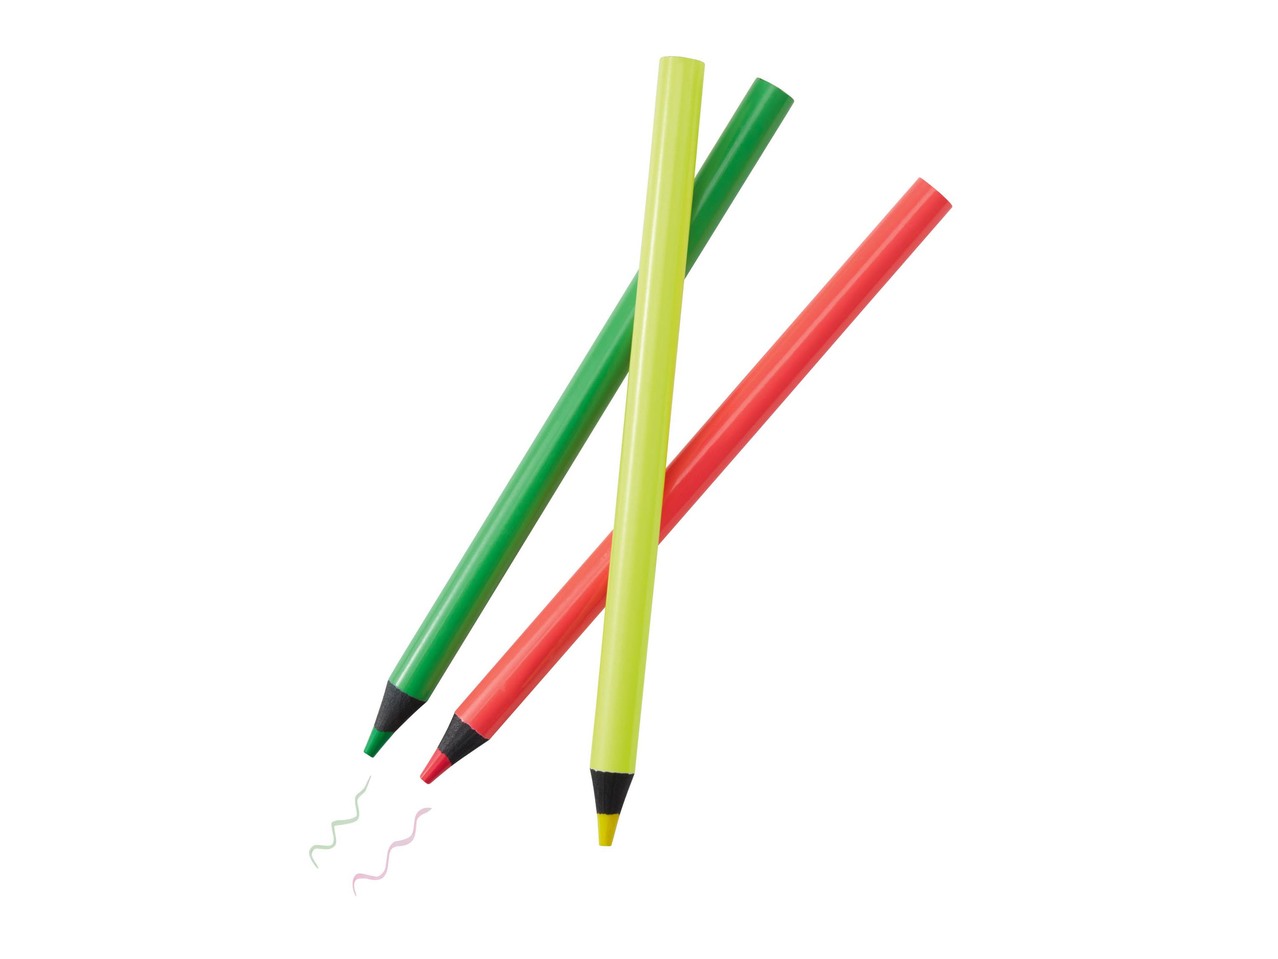 "Neon" Stationery Articles